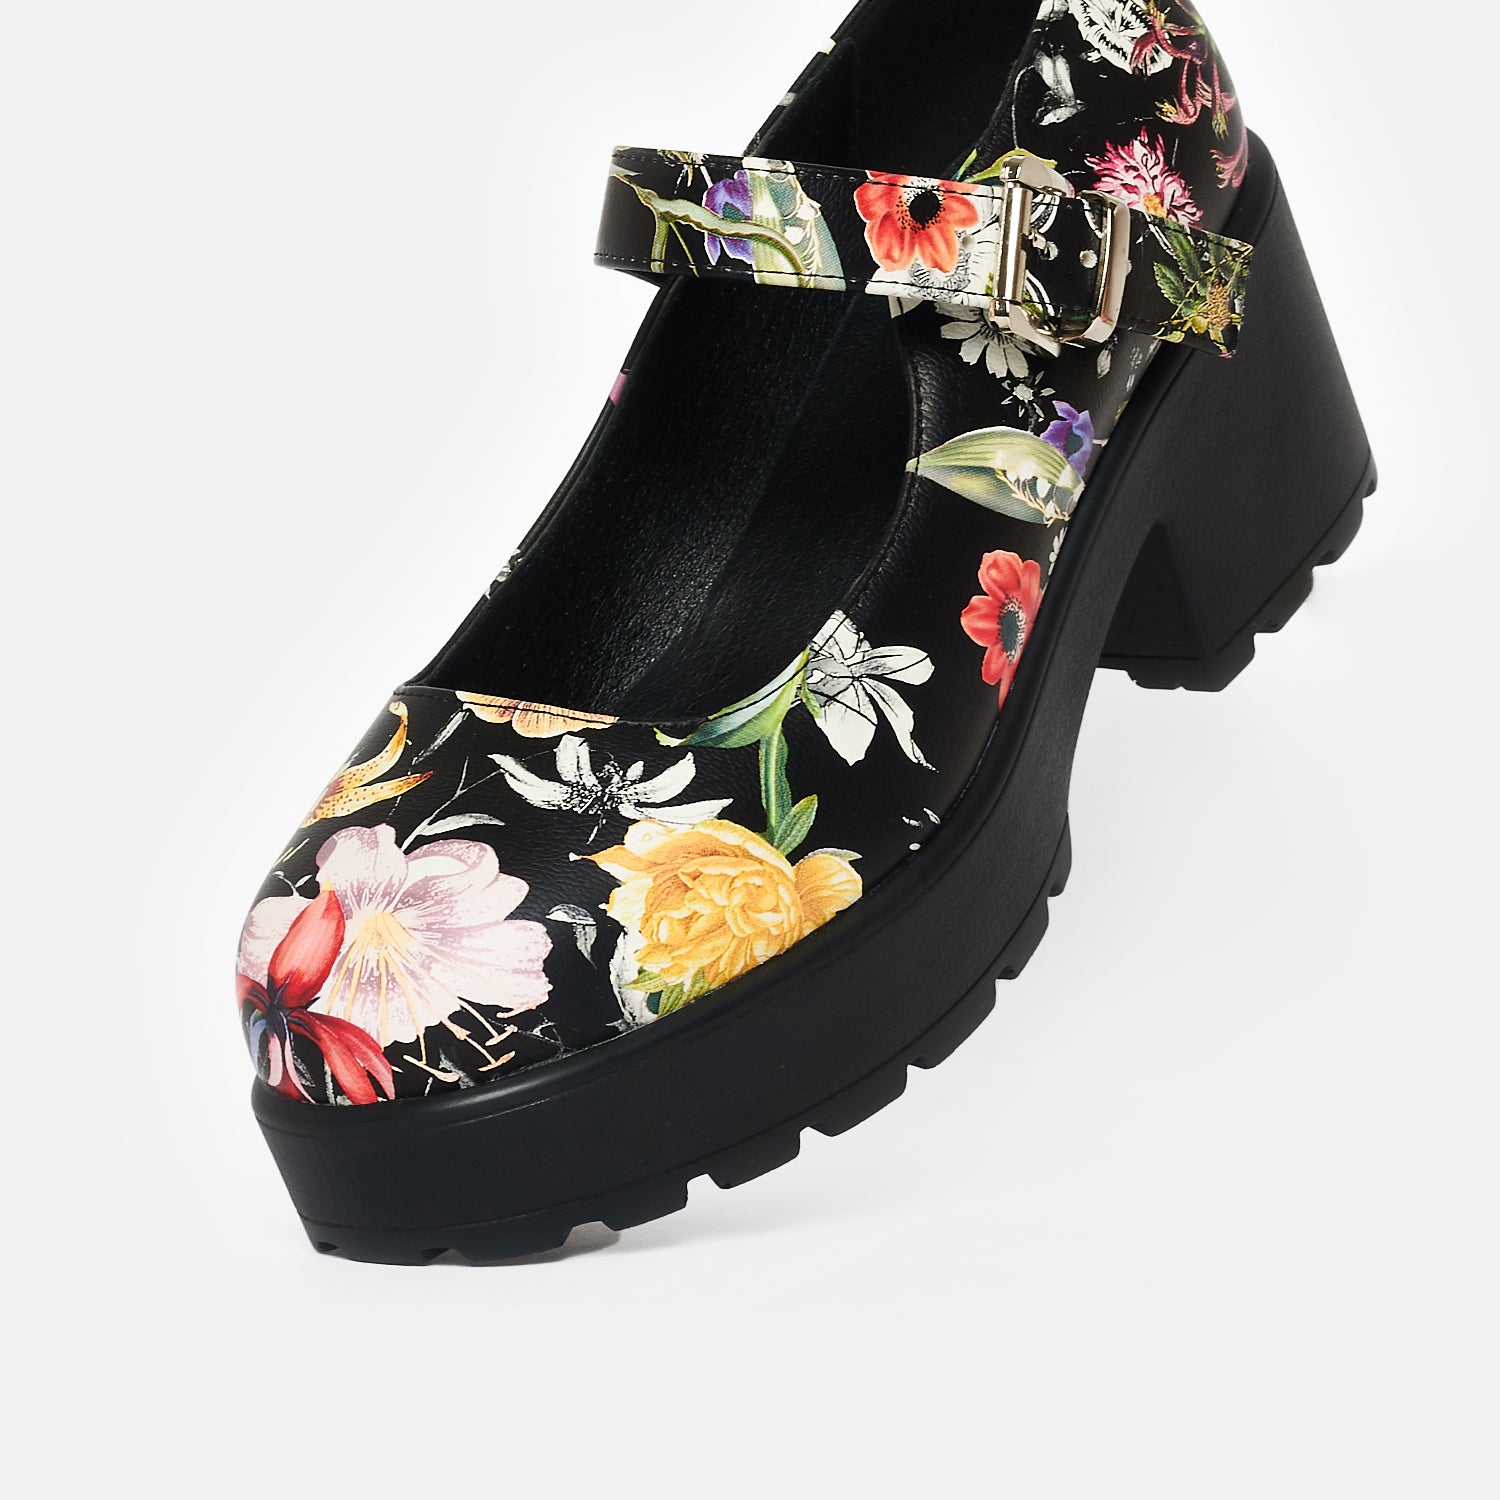 Tira Mary Jane Shoes 'Floral Edition' - Mary Janes - KOI Footwear - Black - Front View